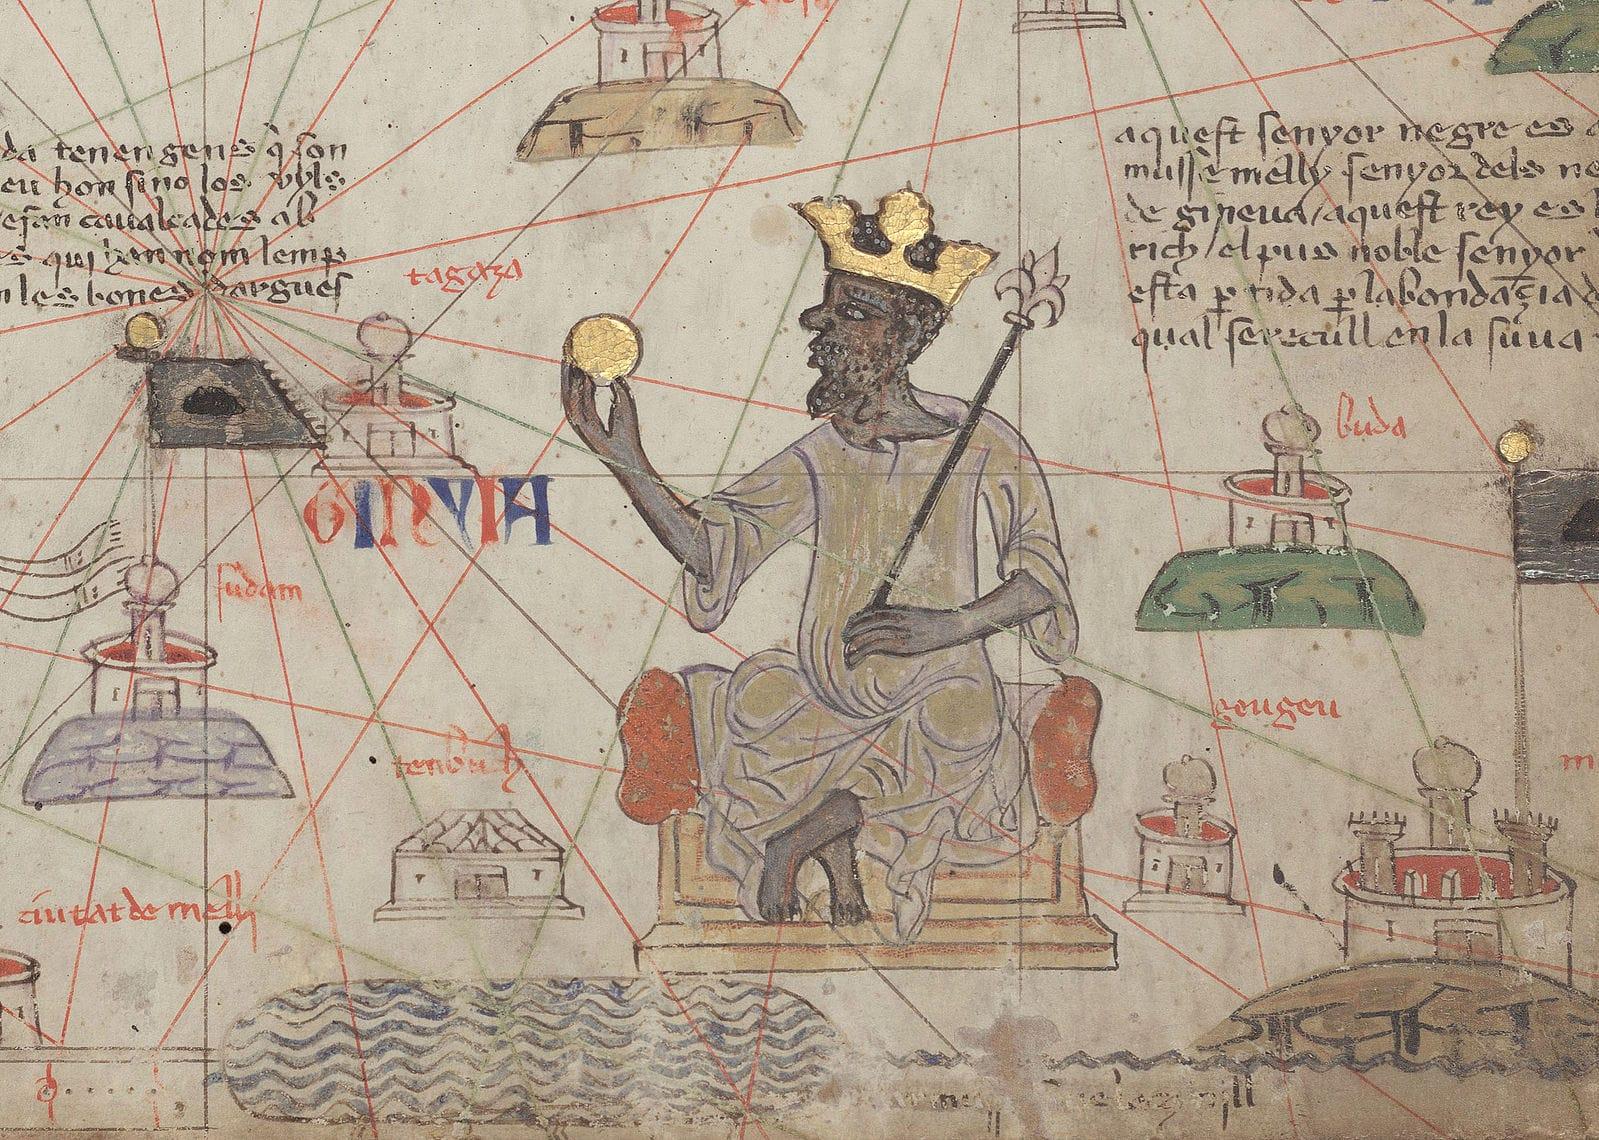 Musa depicted holding a gold coin from the 1375 Catalan Atlas.